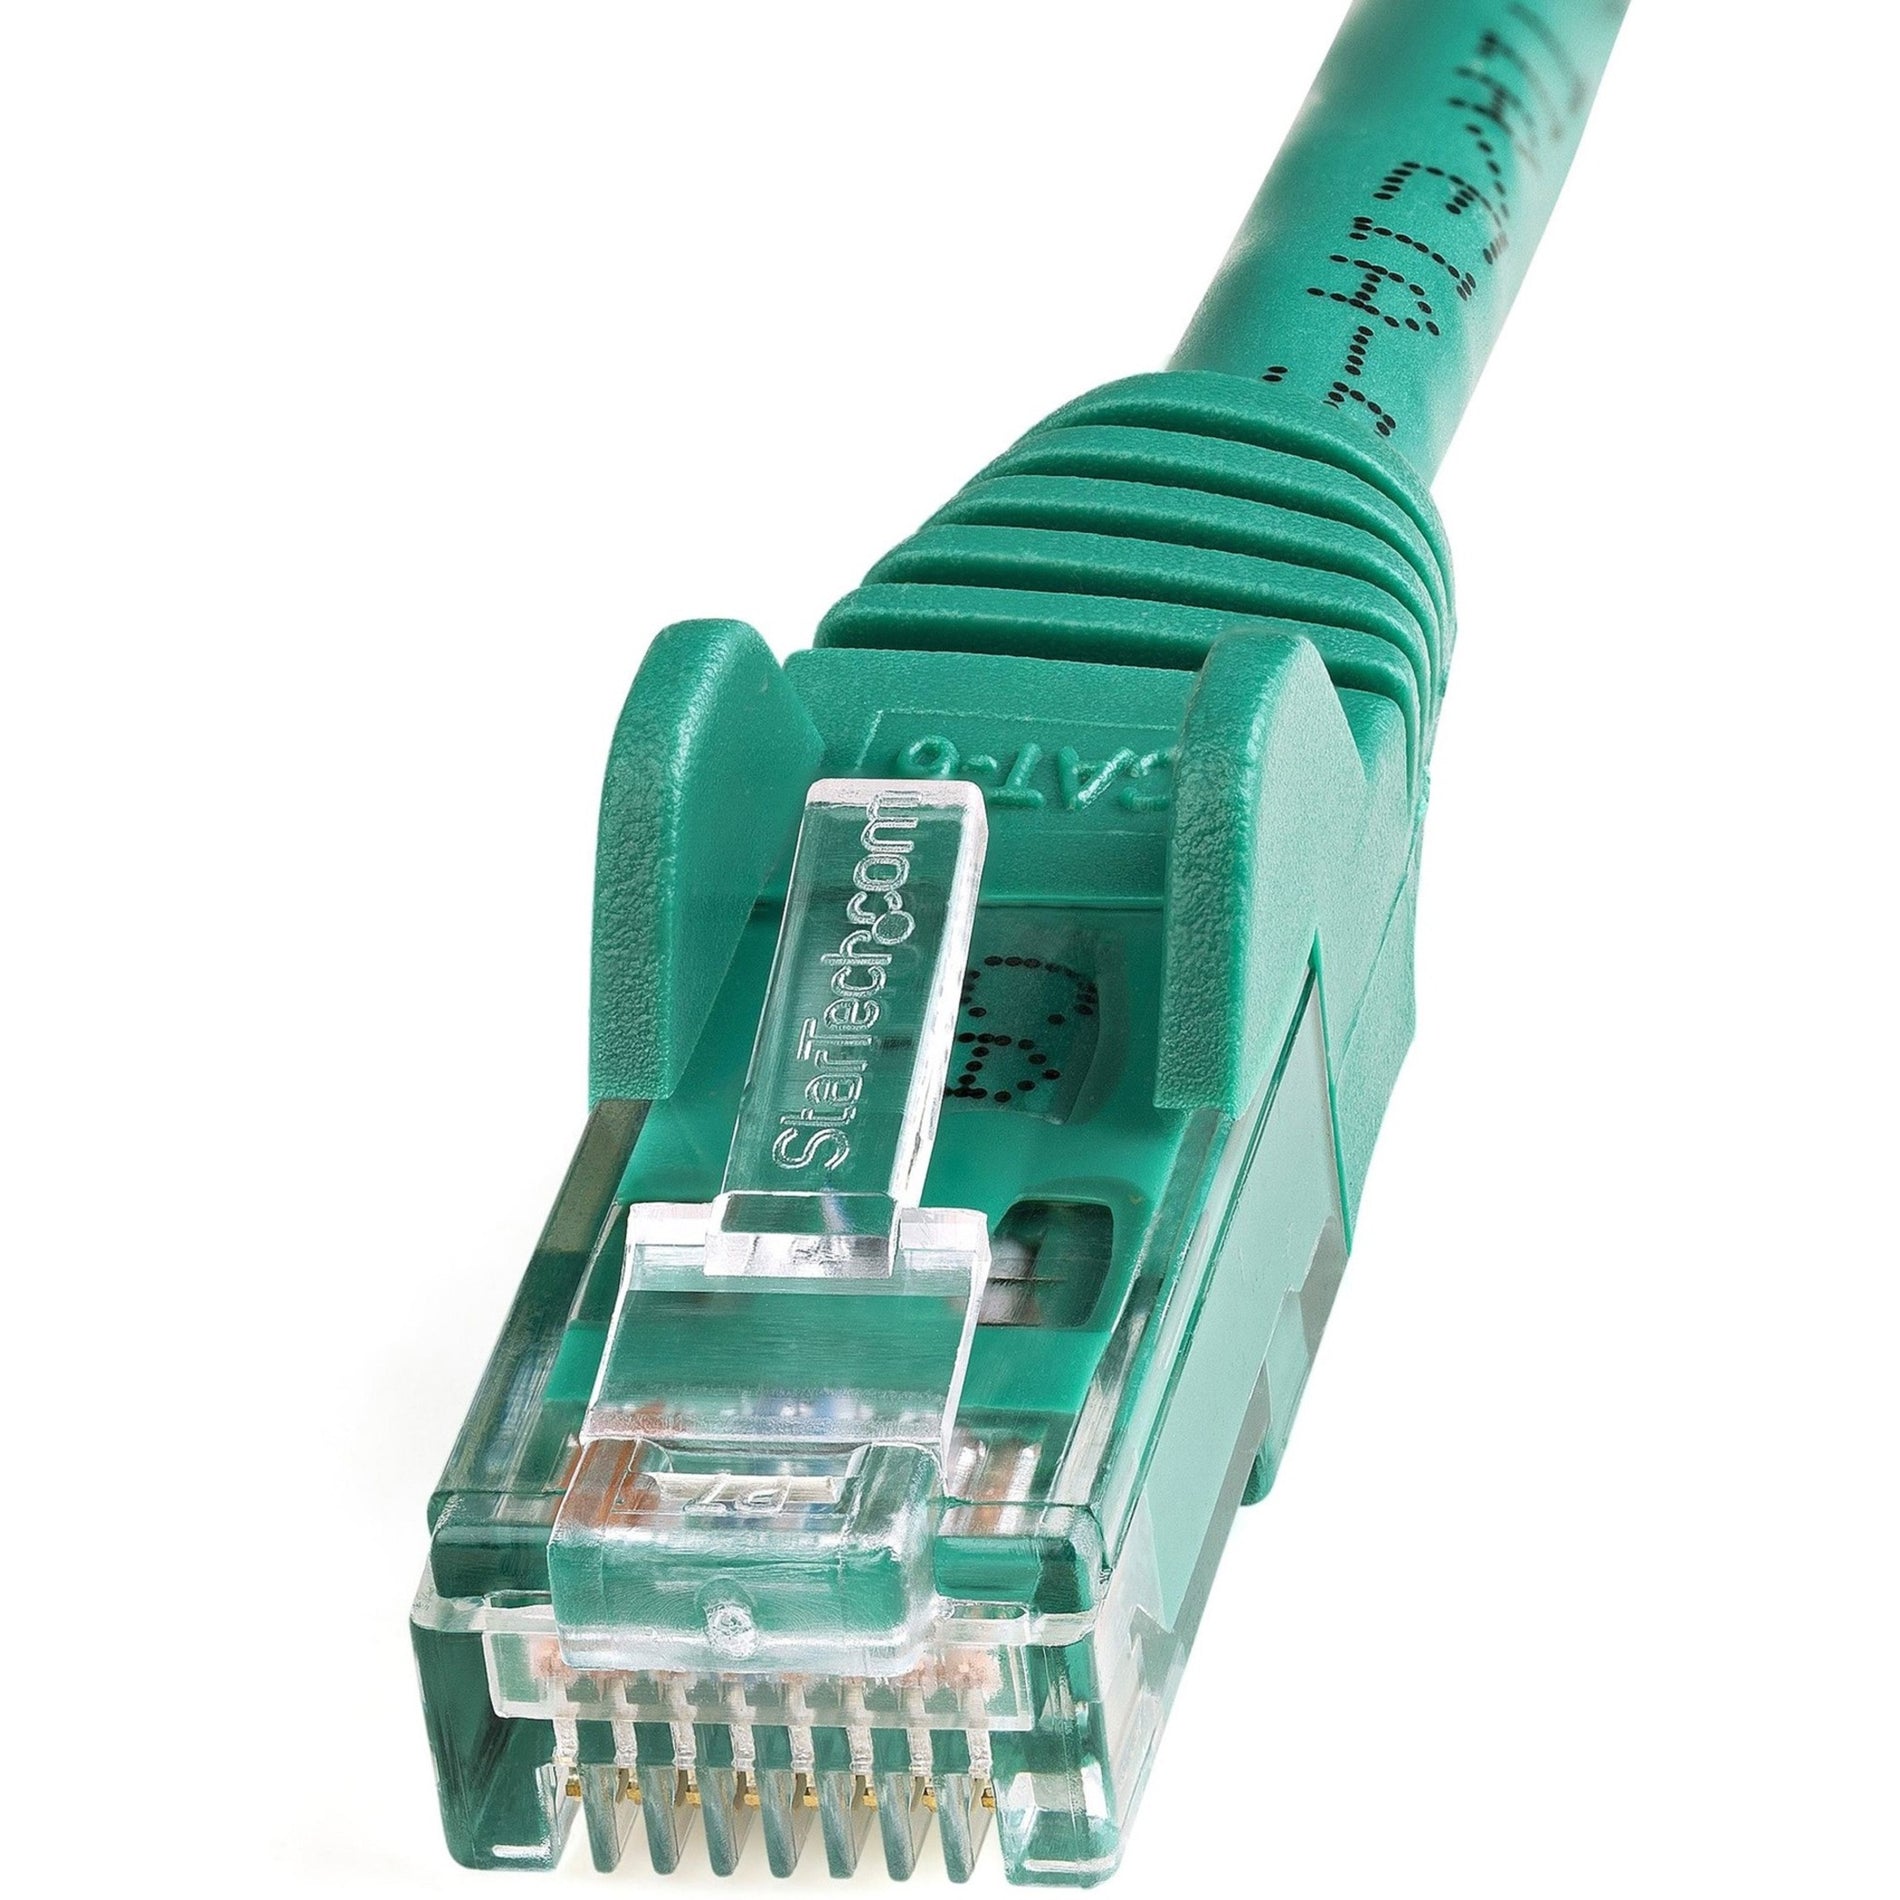 StarTech.com N6PATCH10GN 10 ft Green Snagless Cat6 UTP Patch Cable, 10 Gbit/s Data Transfer Rate, Lifetime Warranty